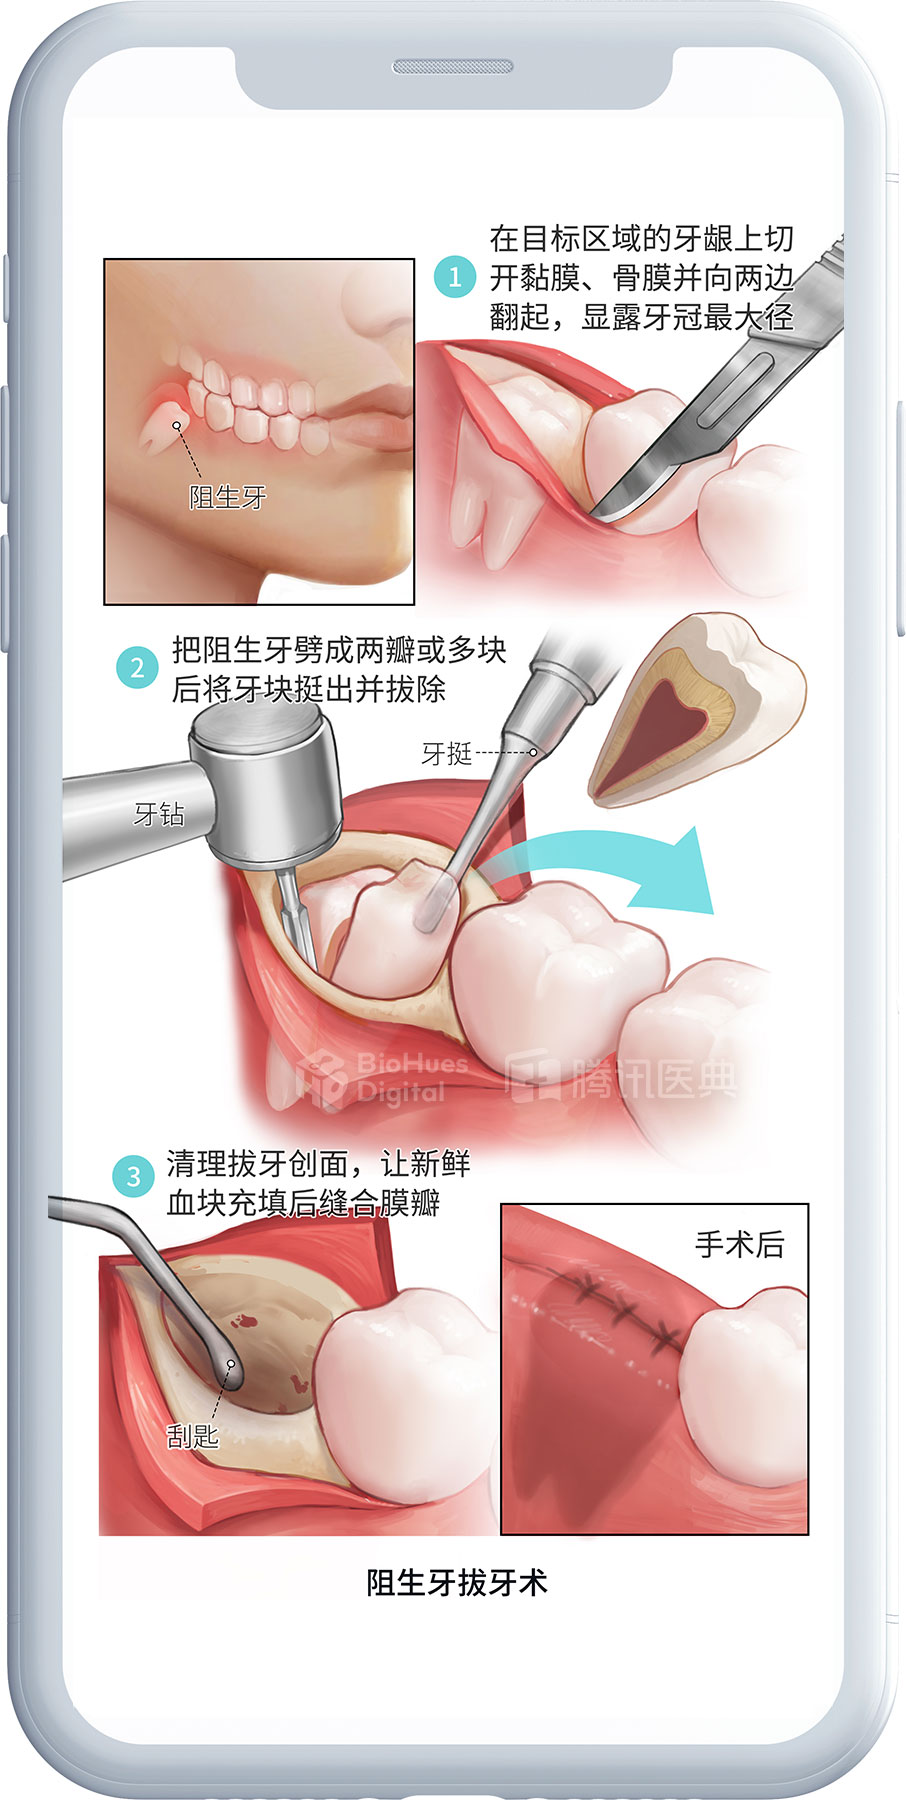 Medical illustration of wisdom tooth removal